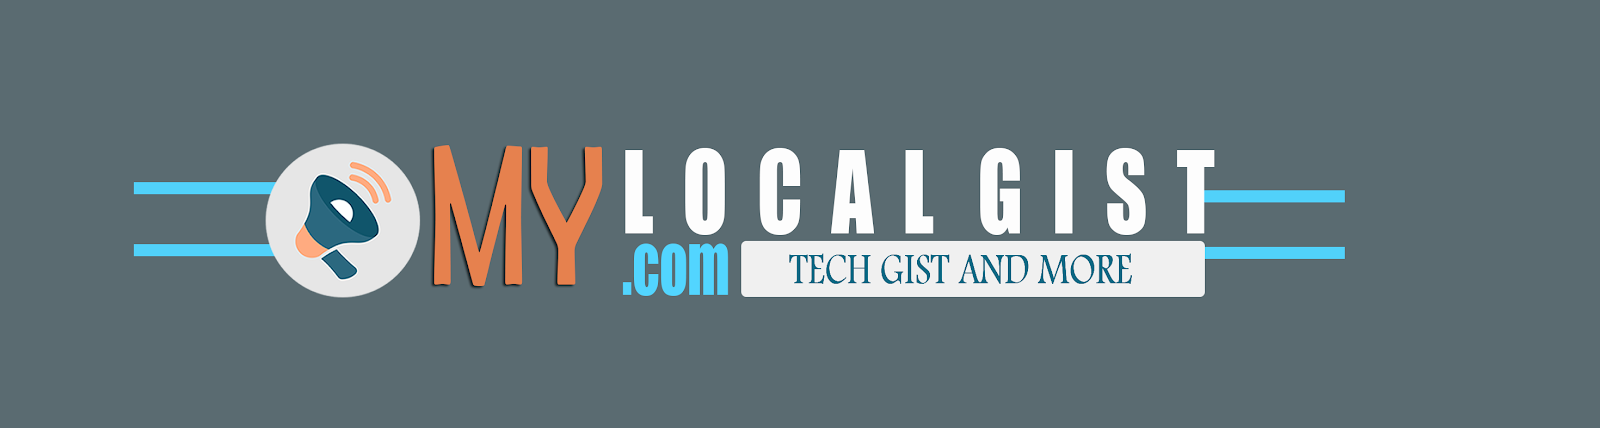 My Online Gist - Home of Tech News and All Gists